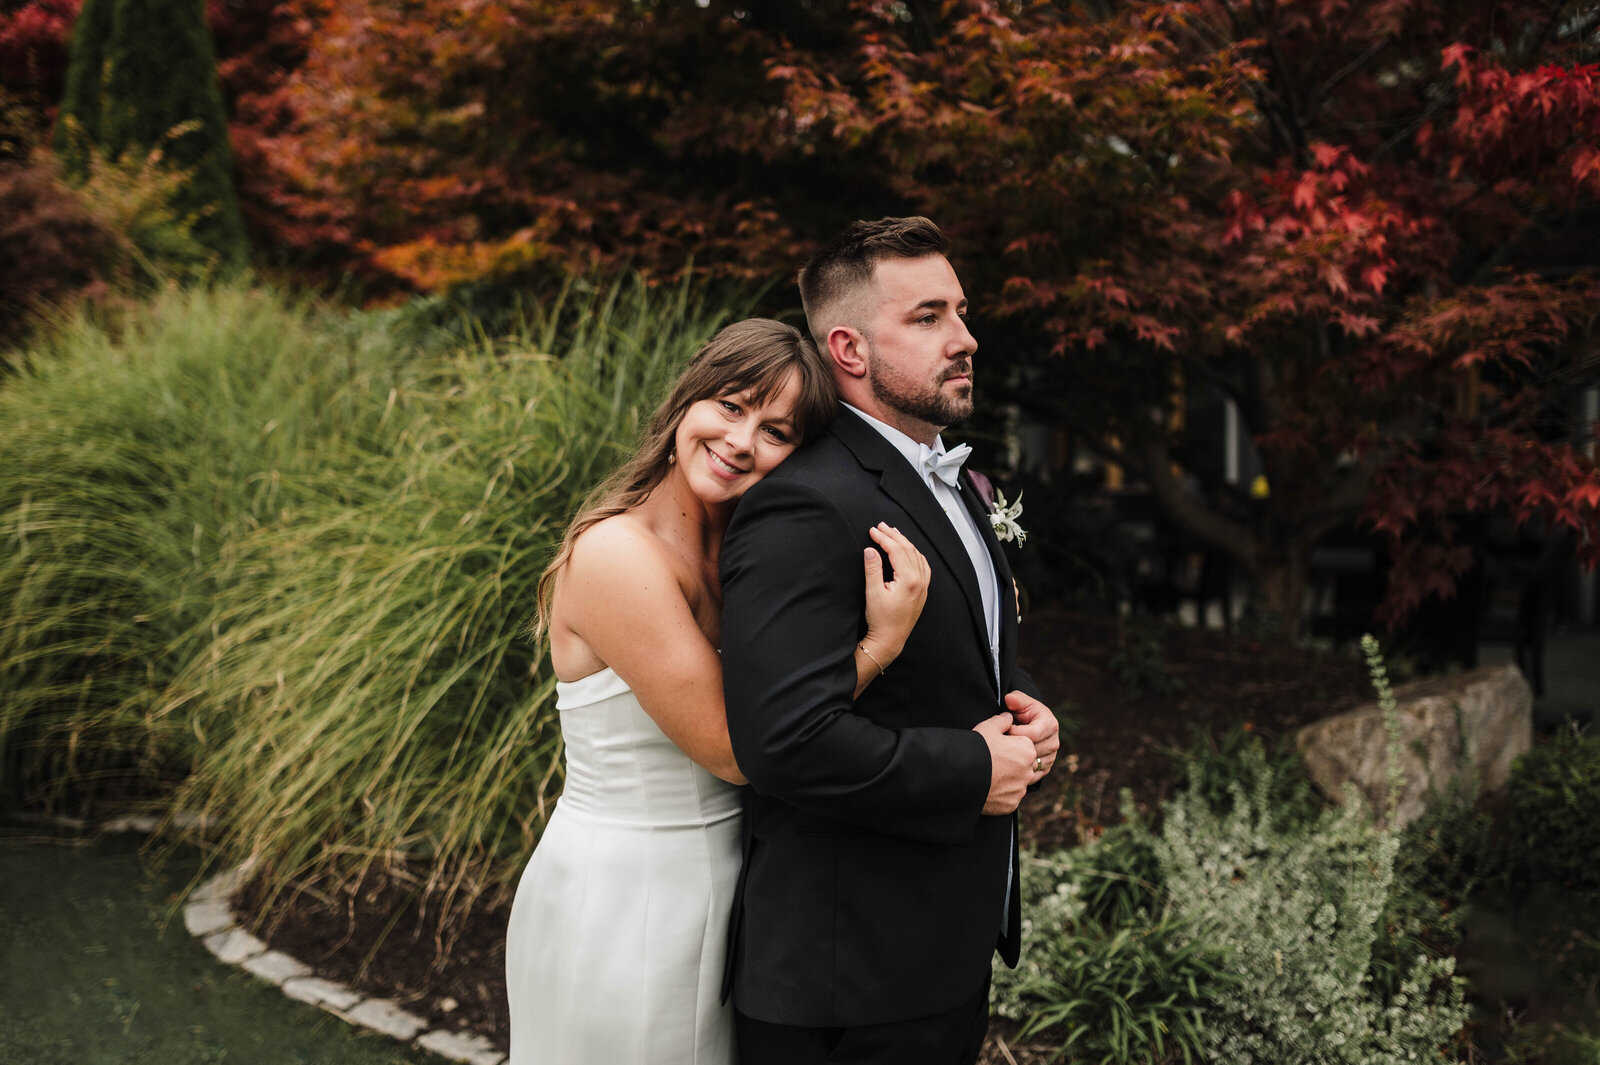 sweet outdoor bridal portraits with bride and groom